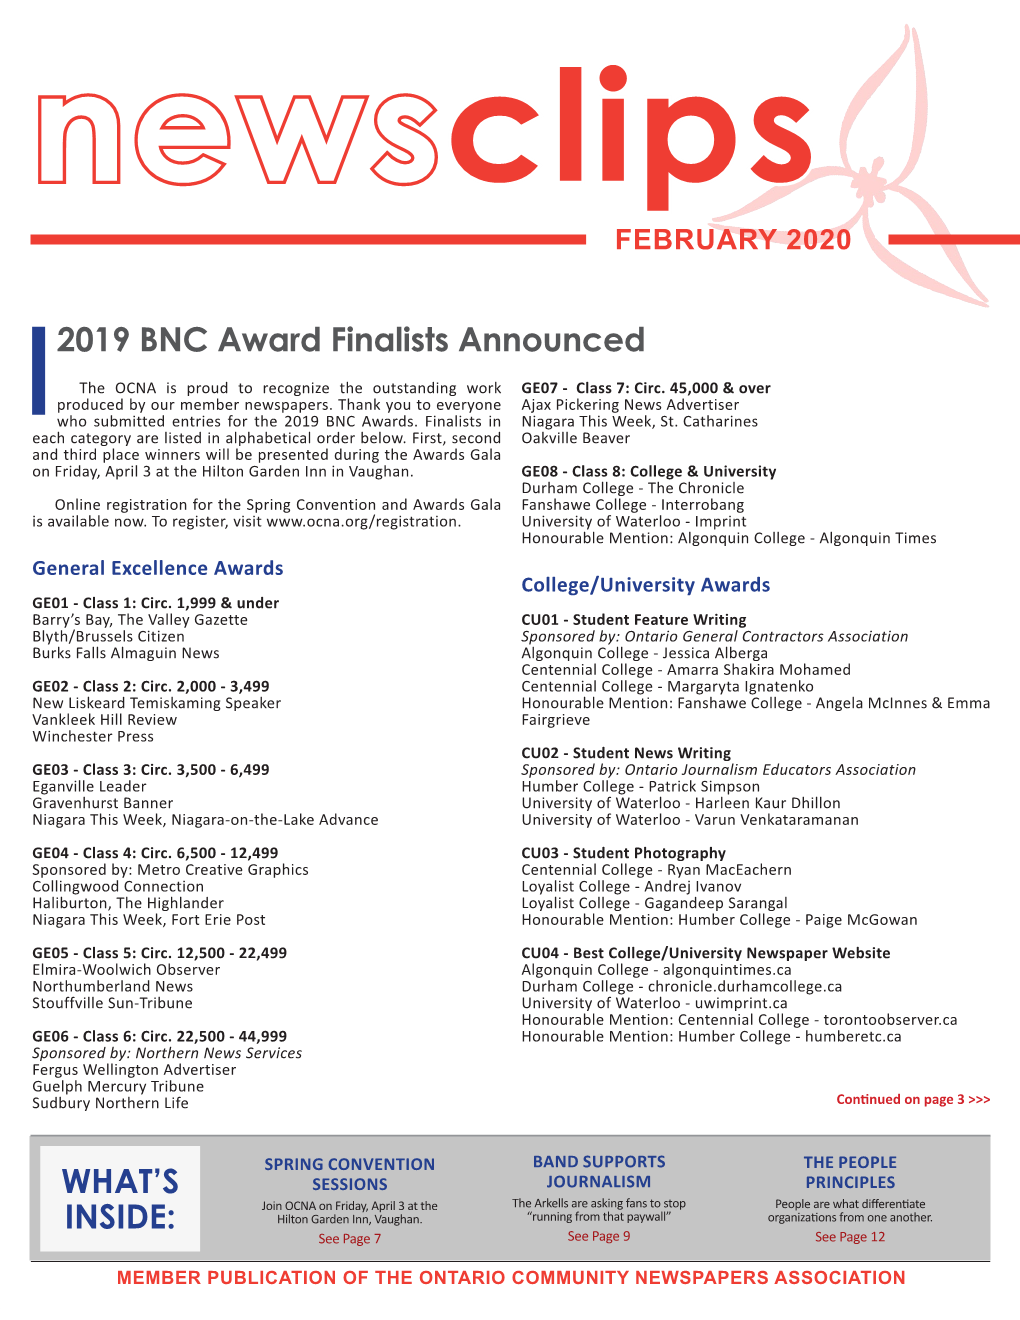 WHAT's INSIDE: 2019 BNC Award Finalists Announced